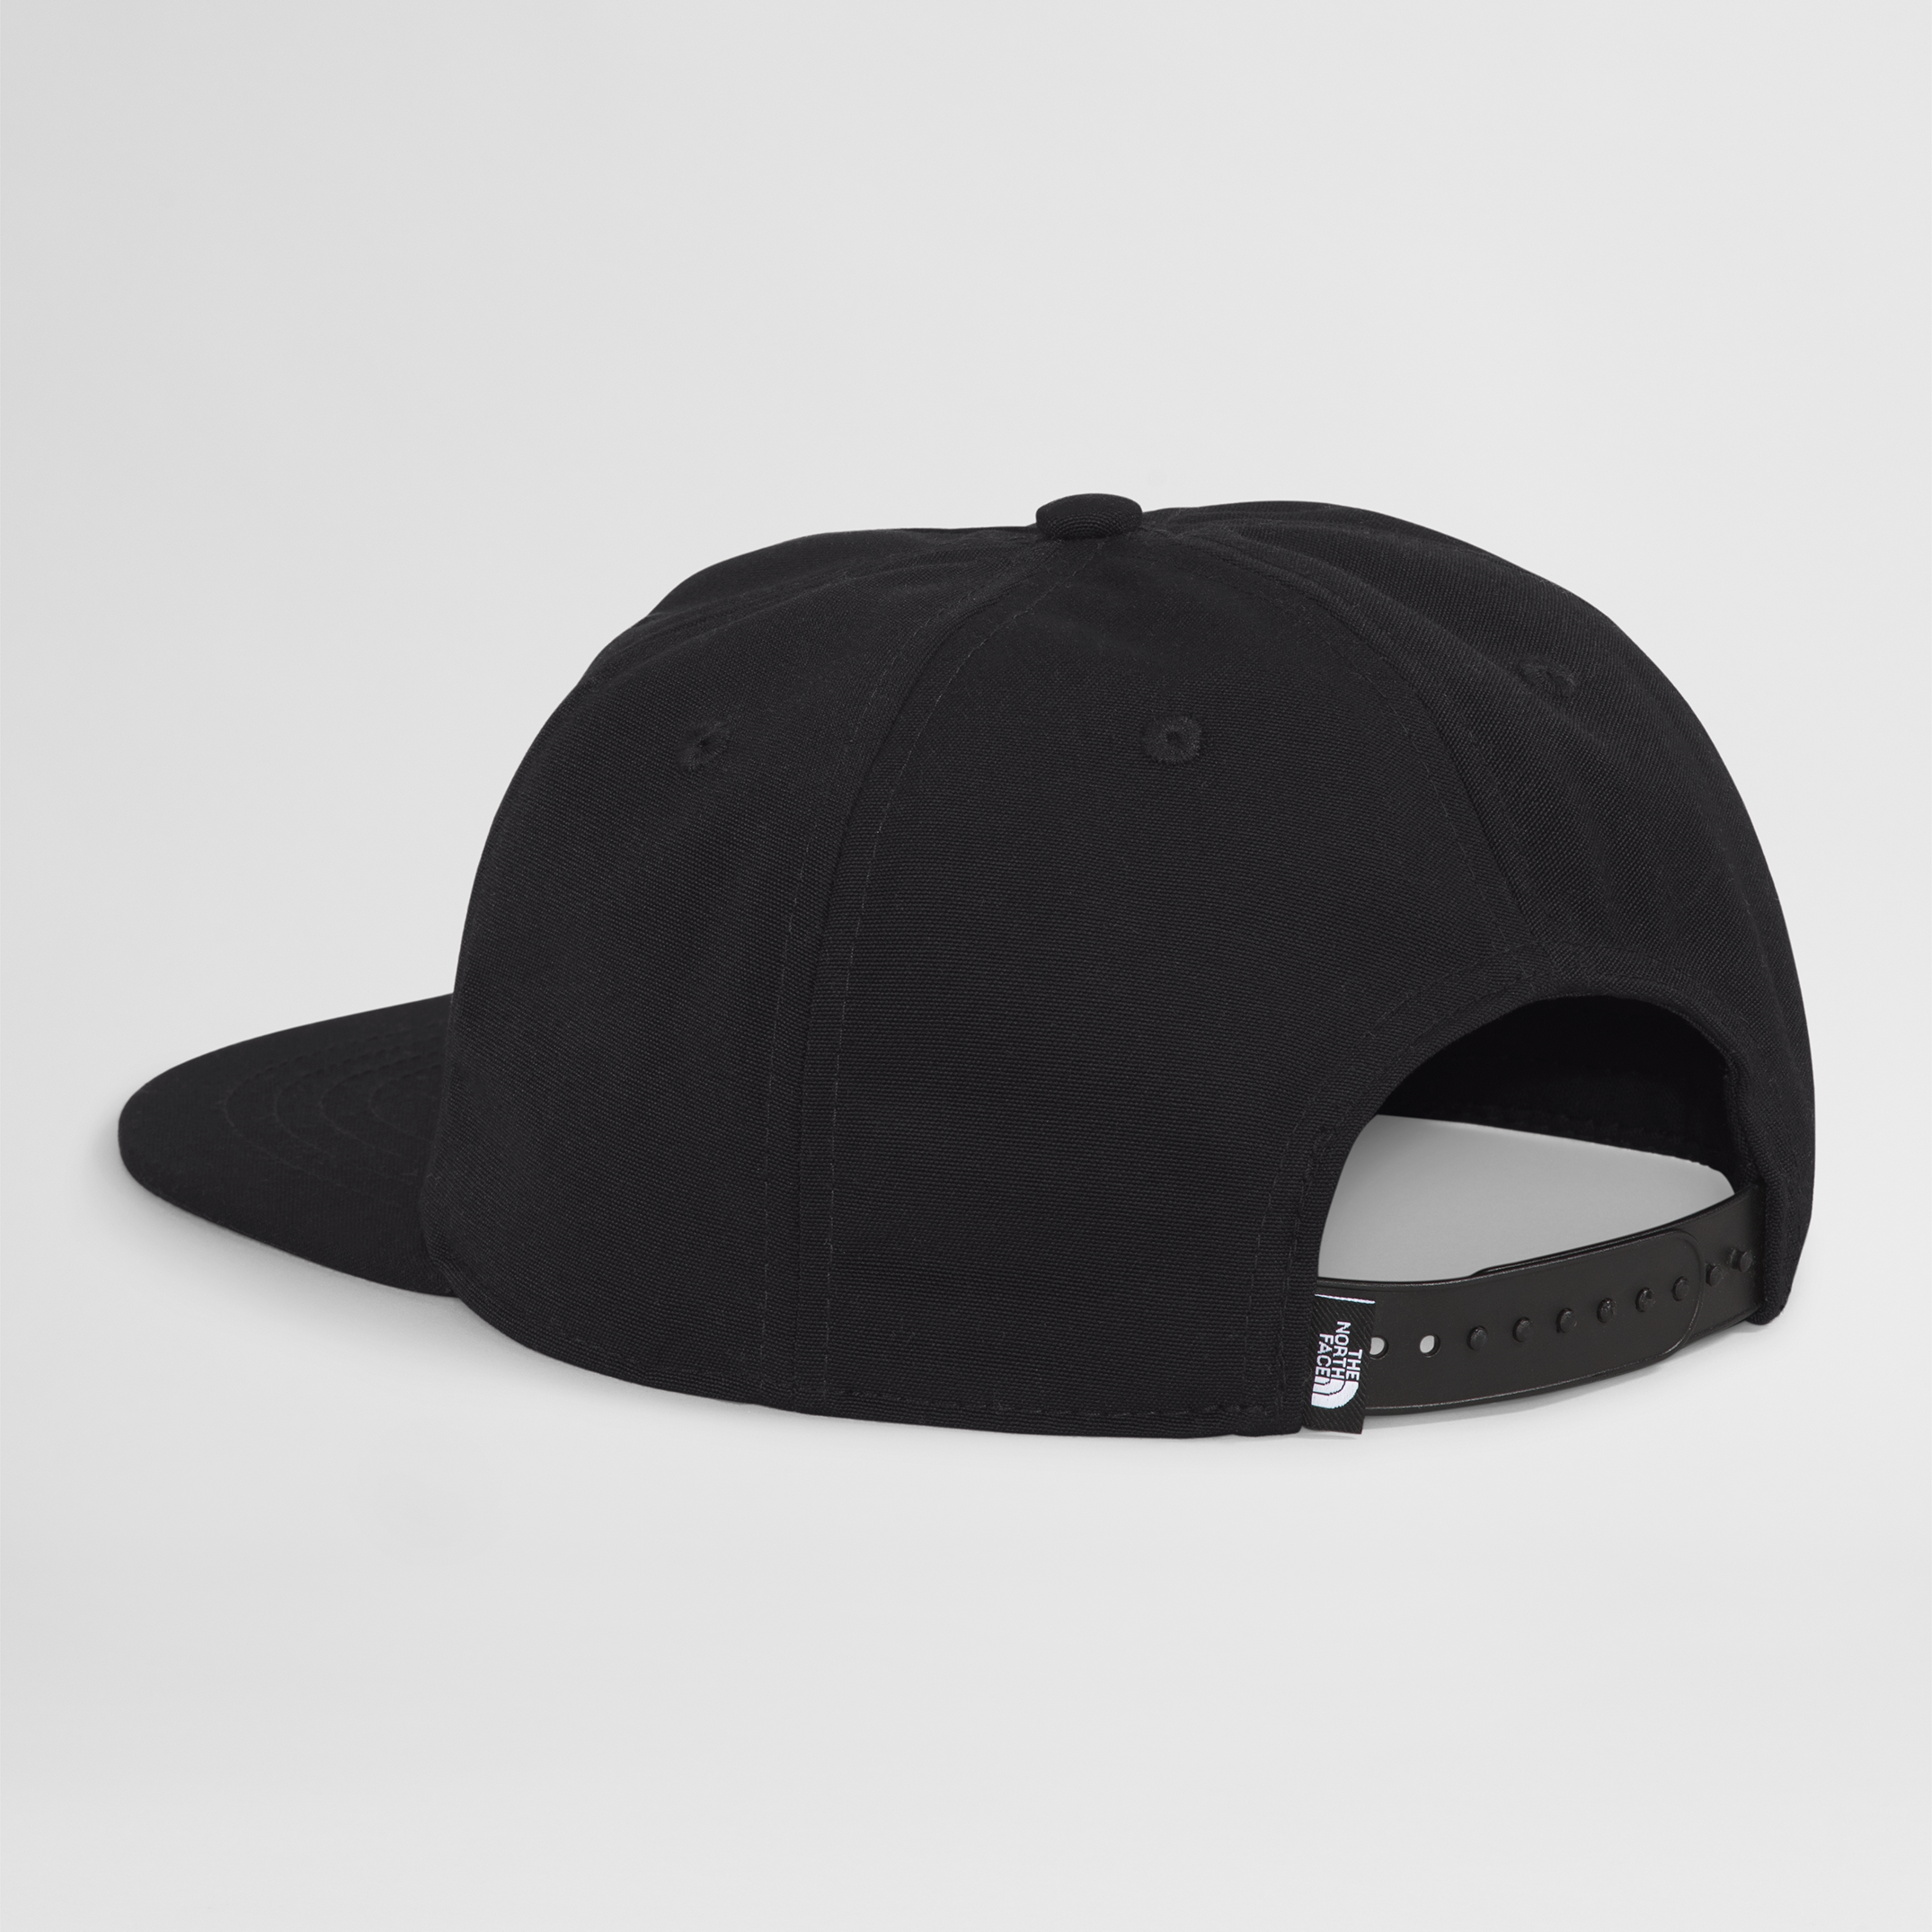 TNF 5 PANEL RECYCLED 66 HAT